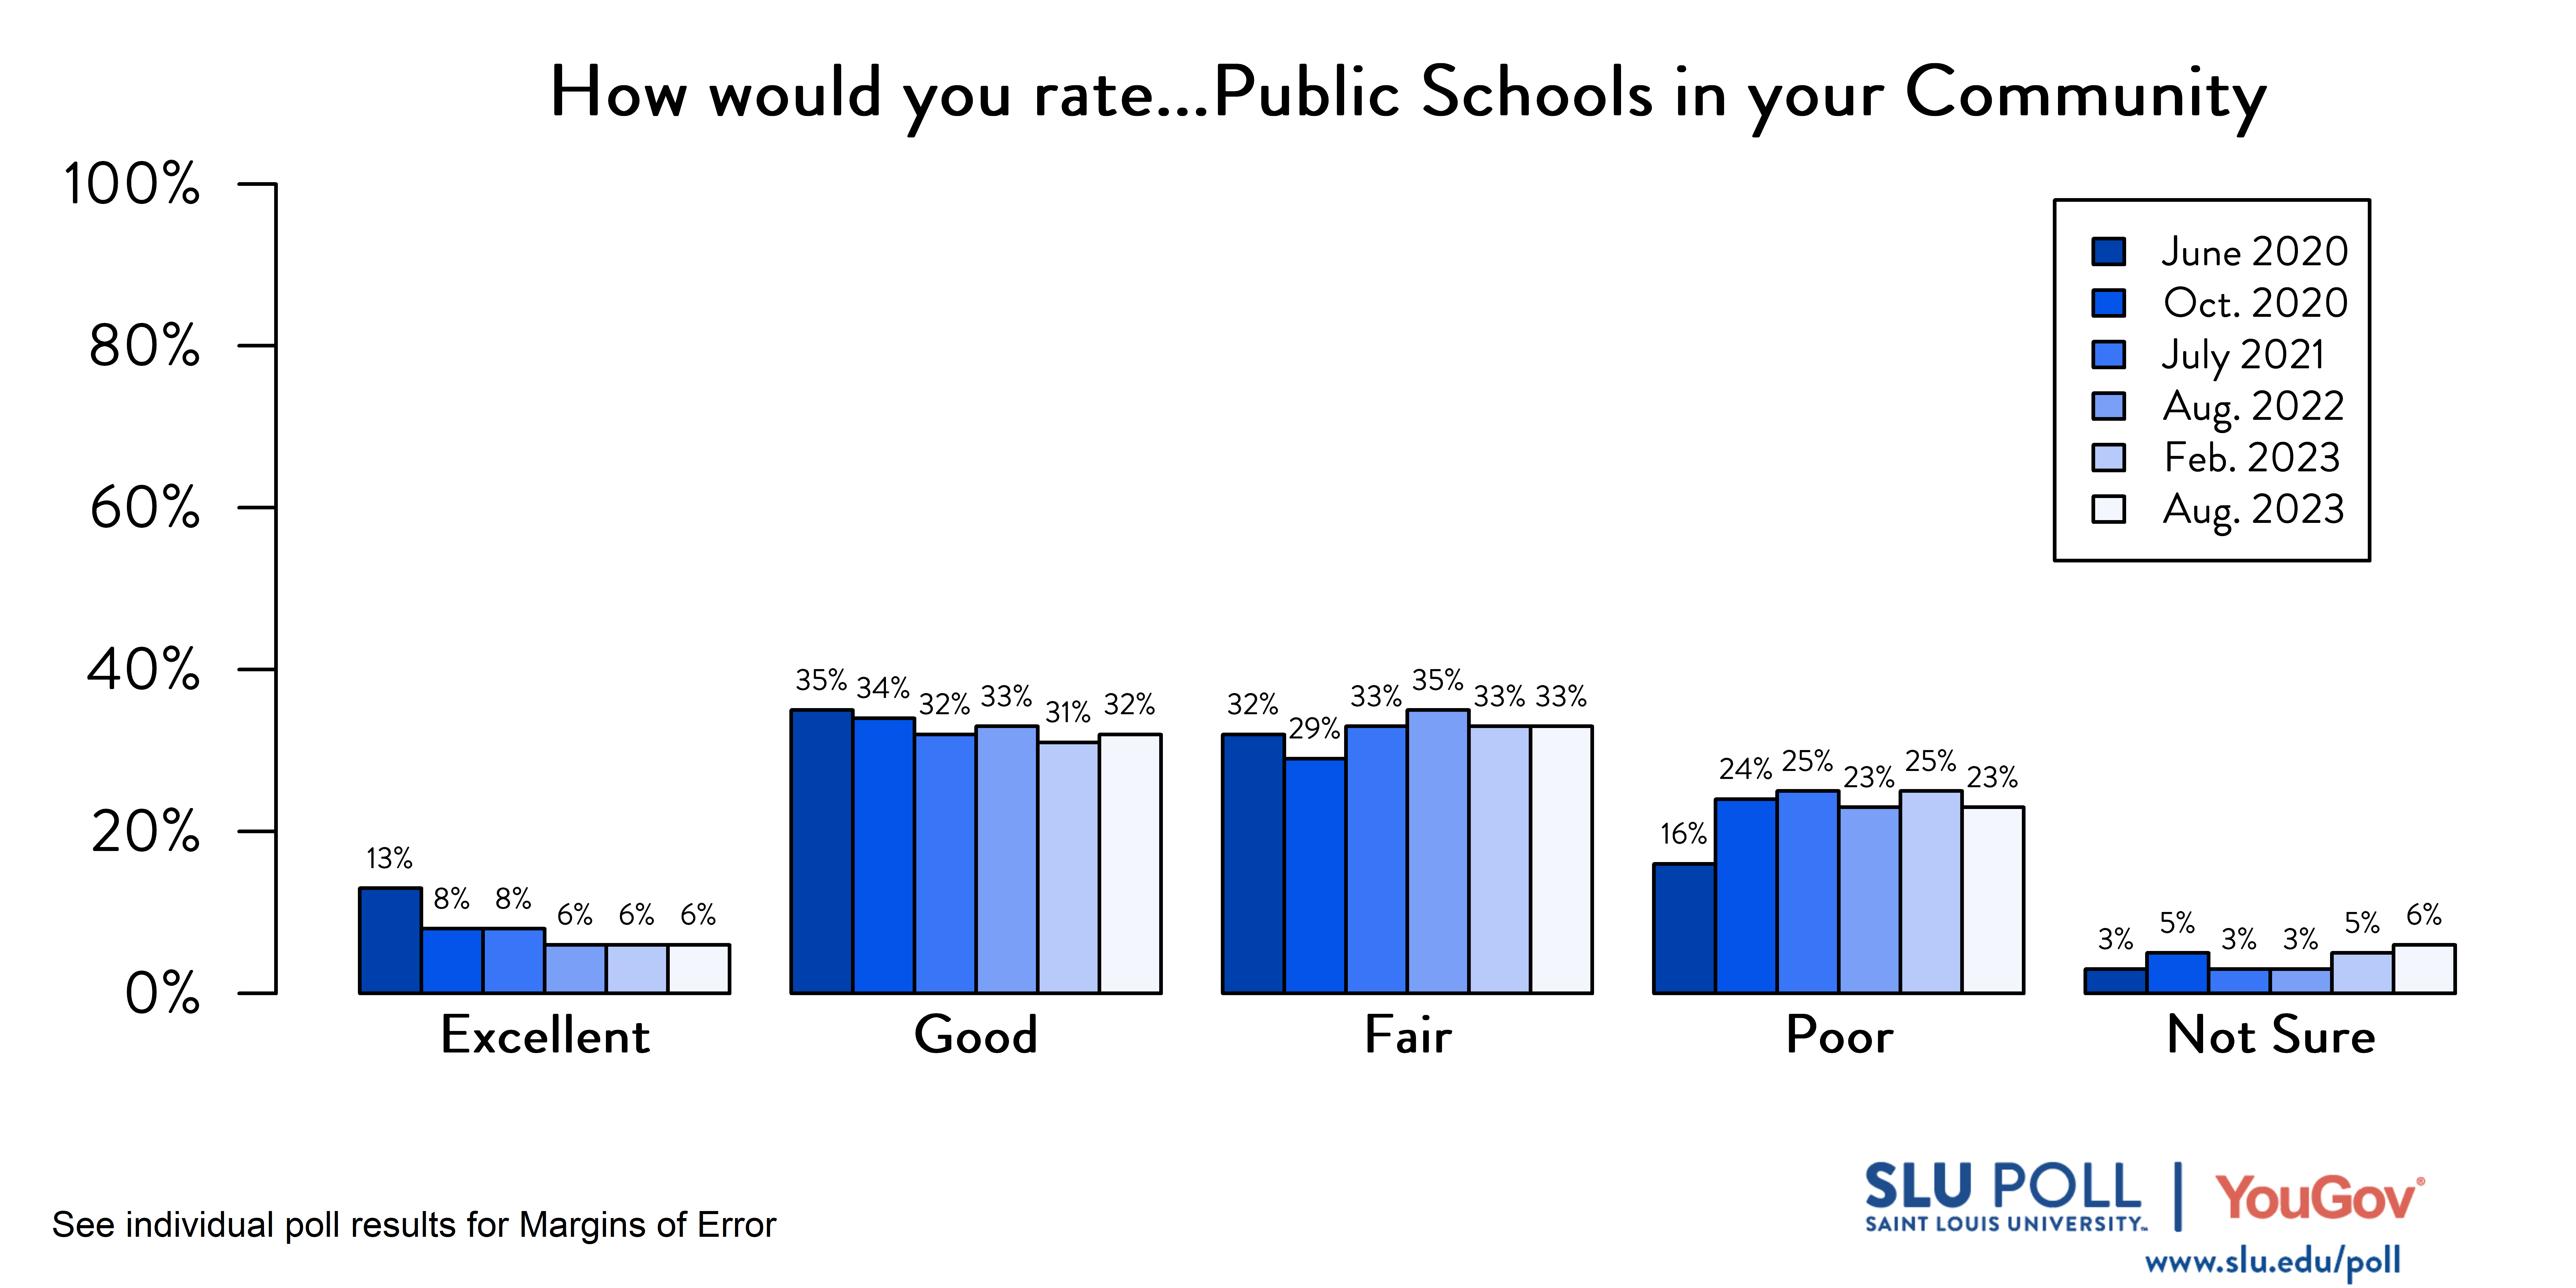 Likely voters' responses to 'How would you rate the condition of the following: Public Schools in your community?'. June 2020 Voter Responses 13% Excellent, 35% Good, 32% Fair, 16% Poor, and 3% Not Sure. October 2020 Voter Responses: 8% Excellent, 34% Good, 29% Fair, 24% Poor, and 5% Not sure. July 2021 Voter Responses: 8% Excellent, 32% Good, 33% Fair, 25% Poor, and 3% Not sure. August 2022 Voter Responses: 6% Excellent, 33% Good, 35% Fair, 23% Poor, and 3% Not sure. February 2023 Voter Responses: 6% Excellent, 31% Good, 33% Fair, 25% Poor, and 5% Not sure. August 2023 Voter Responses: 6% Excellent, 32% Good, 33% Fair, 23% Poor, and 6% Not sure.